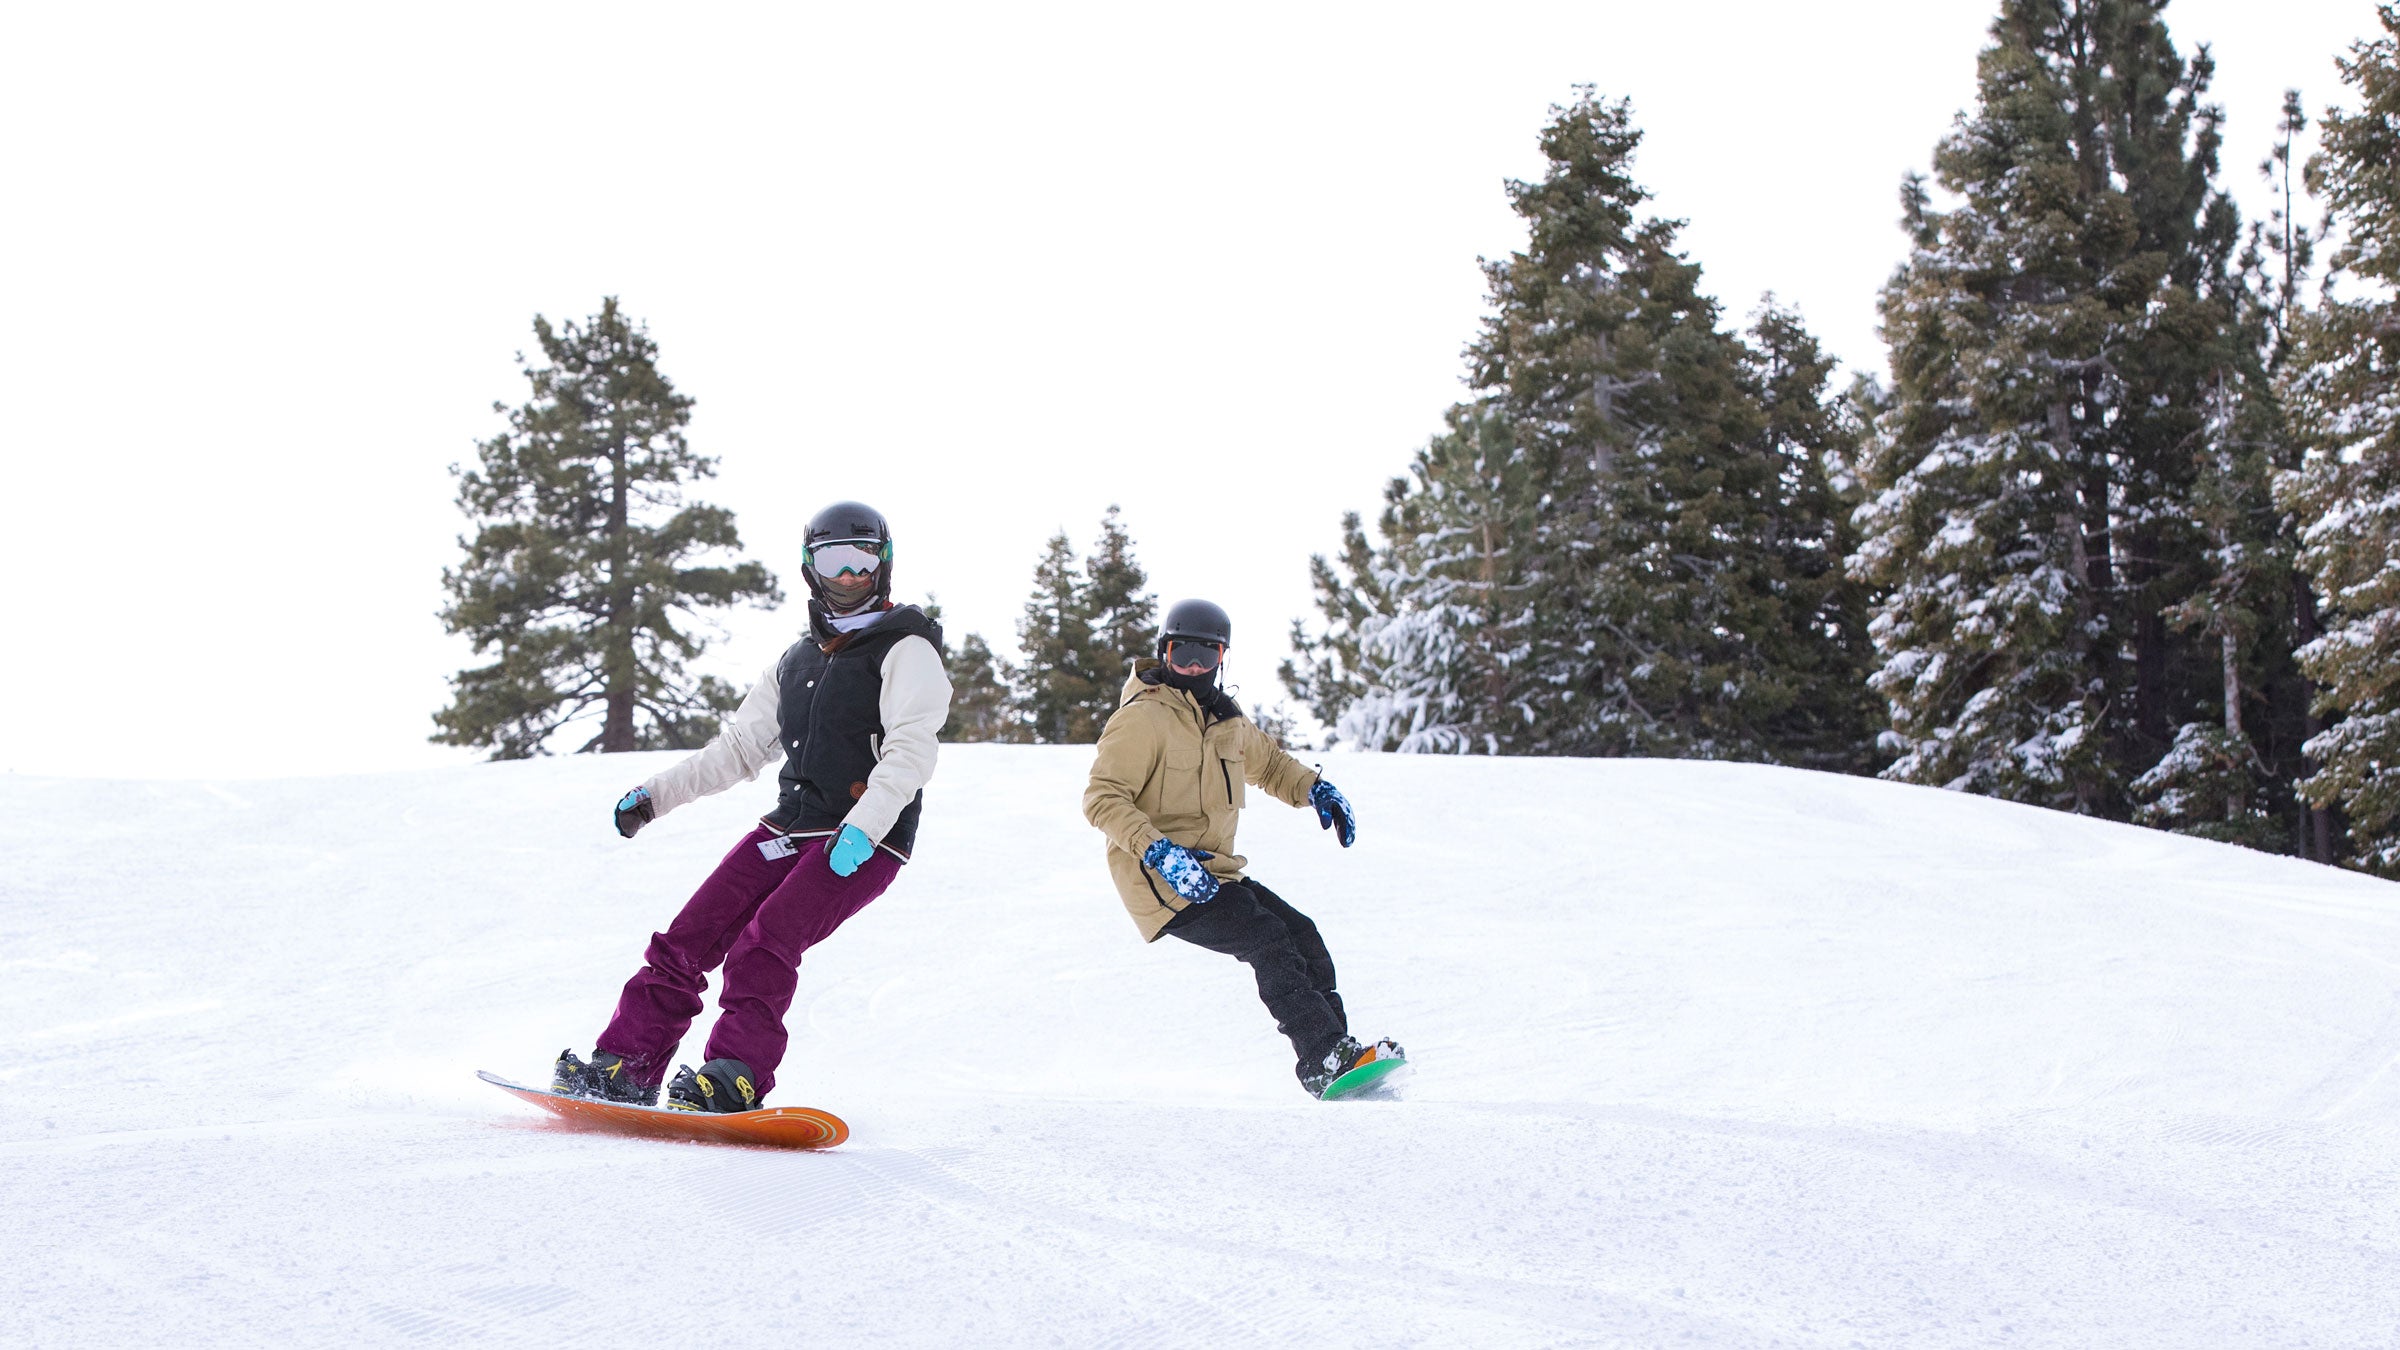 Two snowboarders carving down the slopes